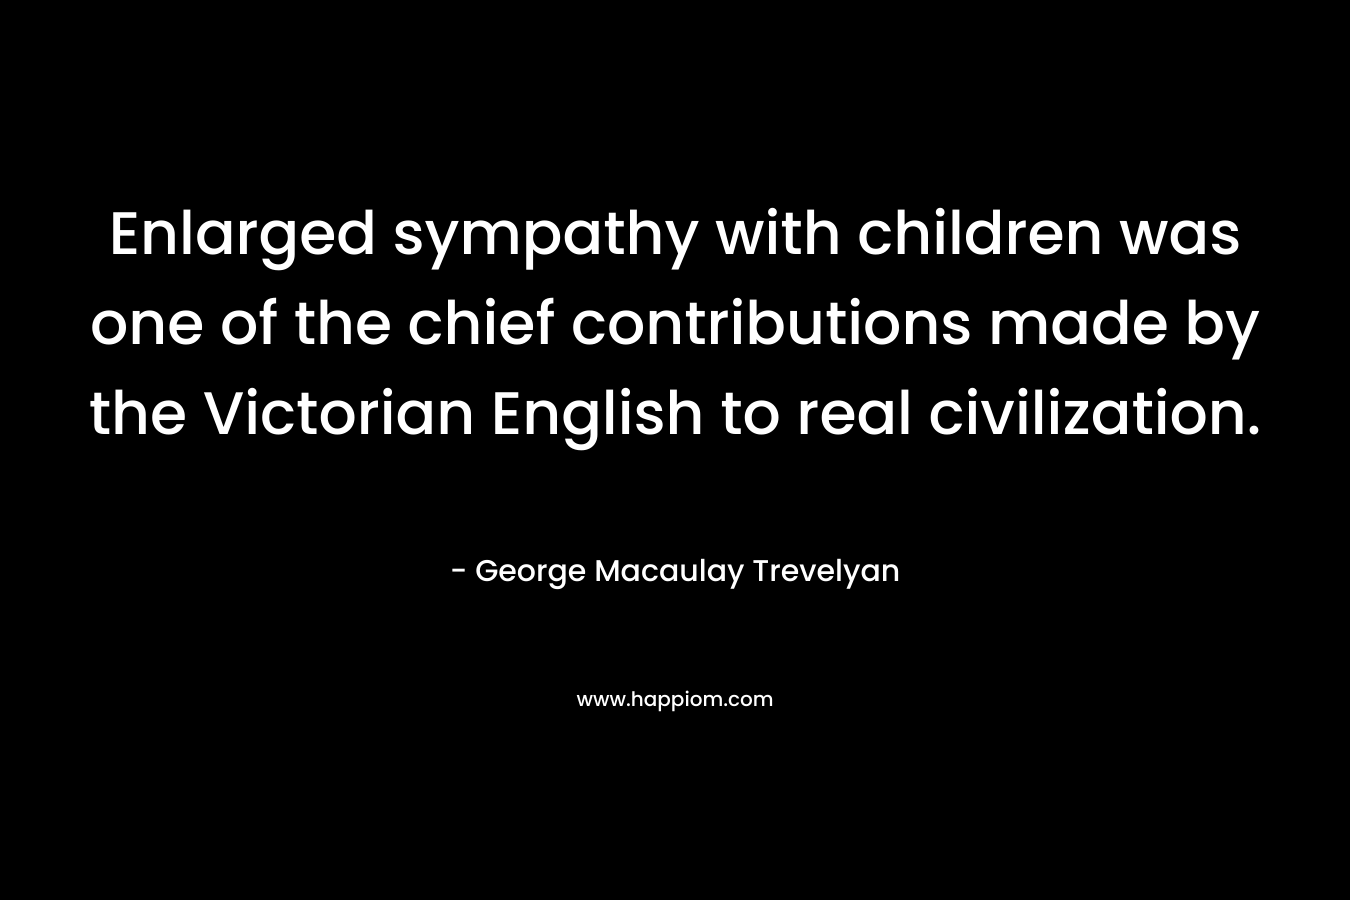 Enlarged sympathy with children was one of the chief contributions made by the Victorian English to real civilization. – George Macaulay Trevelyan